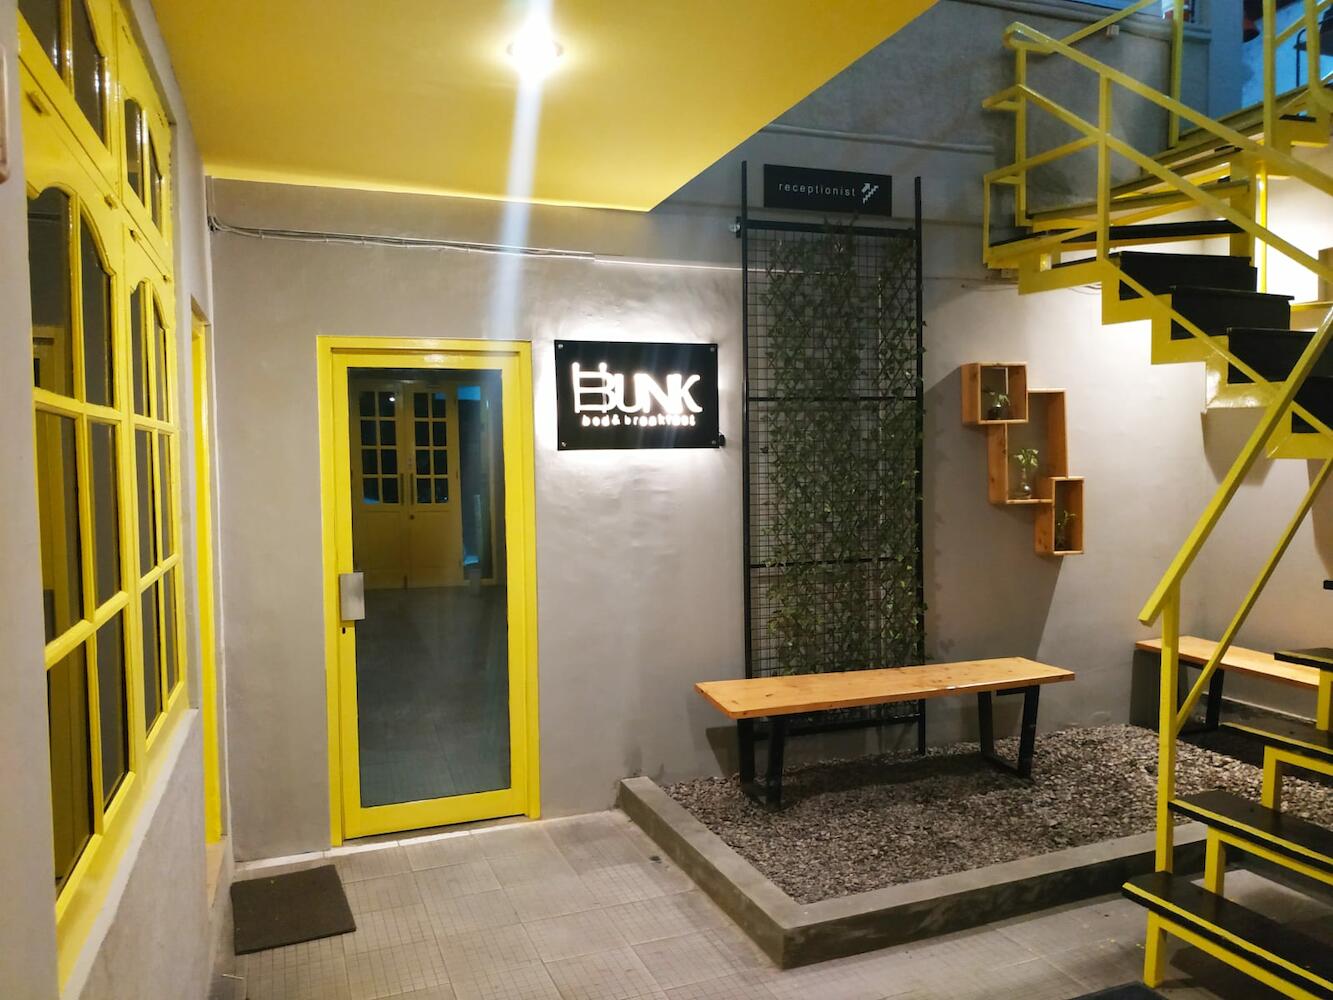 Bunk Bed & Breakfast in Yogyakarta - Prices 2021 (How to compare?)